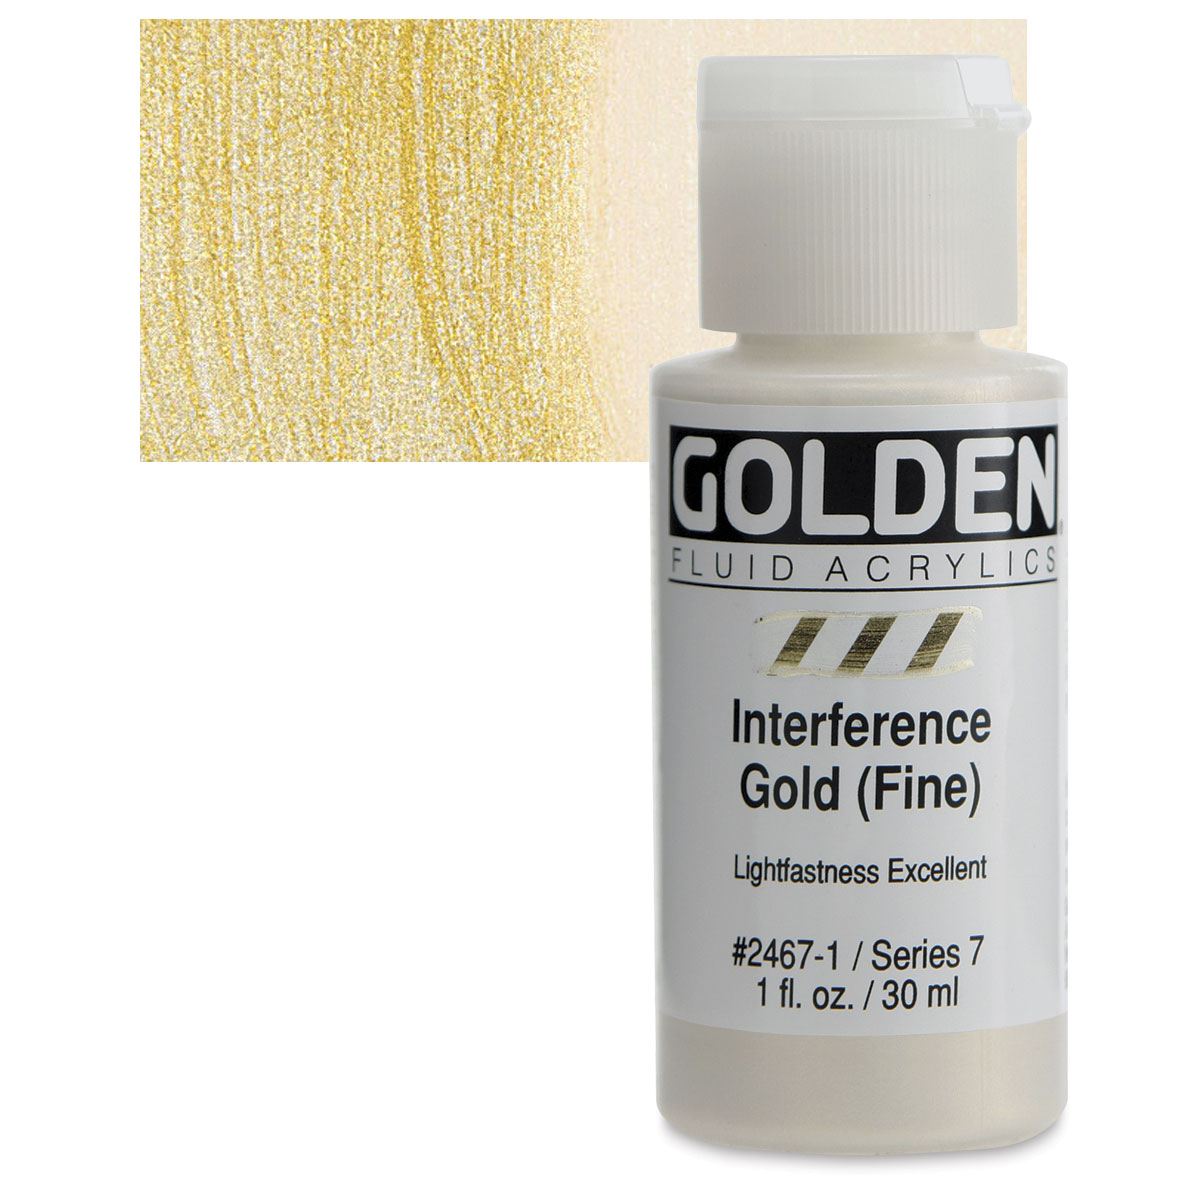 Interference and Iridescent Fluid Acrylic Paint